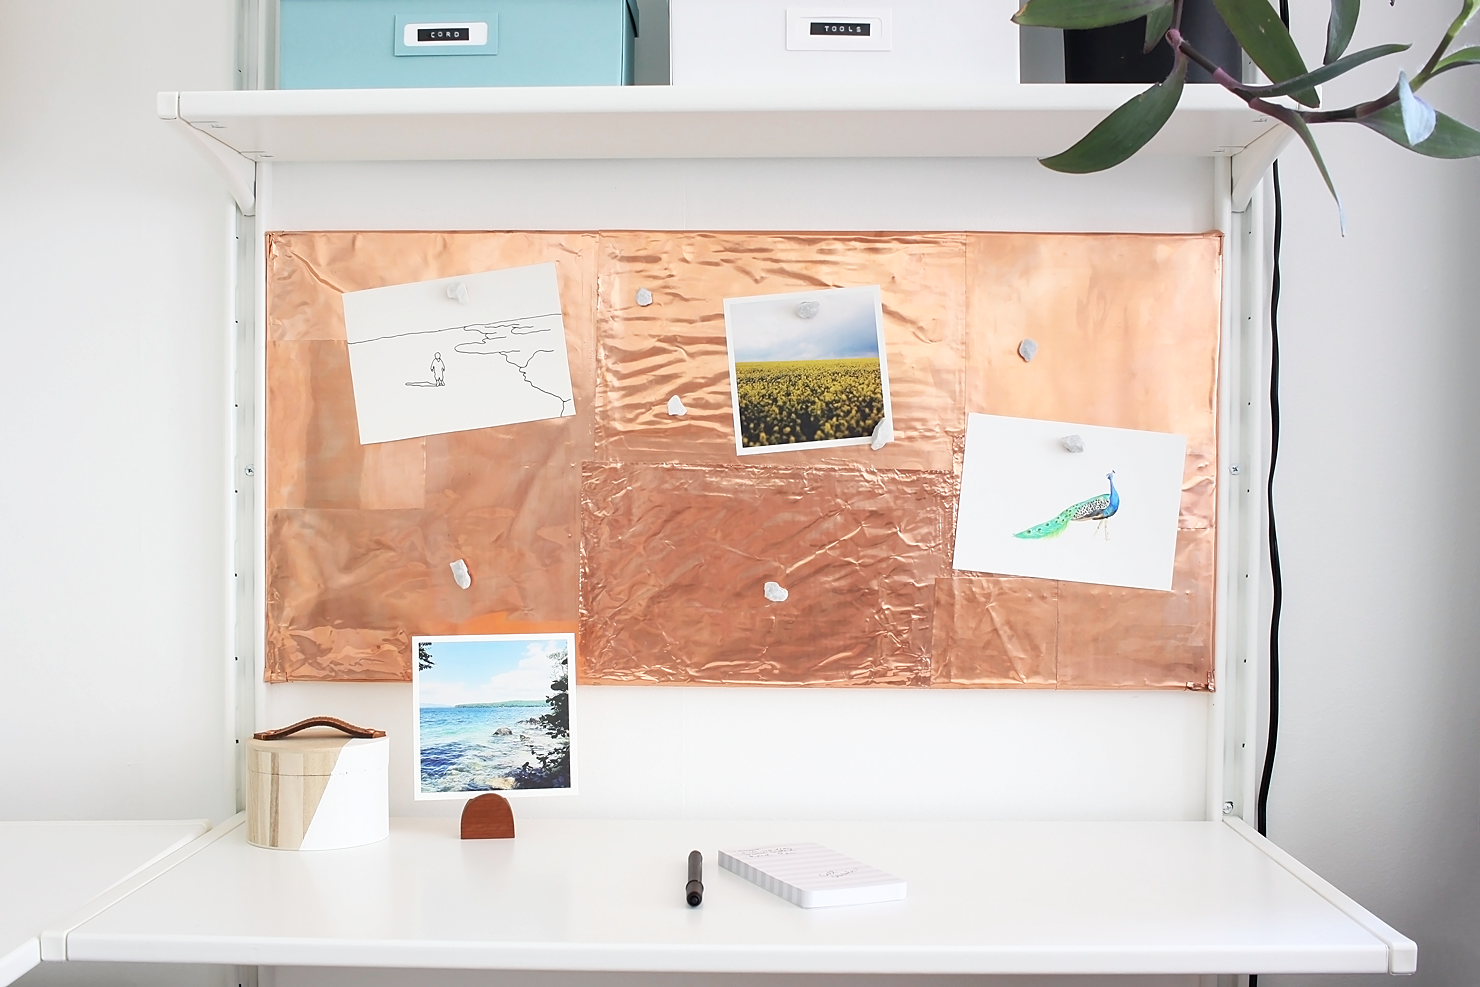 Love this Scandinavian workspace makeover with white open shelves, plenty of storage for craft supplies, and a gorgeous DIY copper inspiration board.